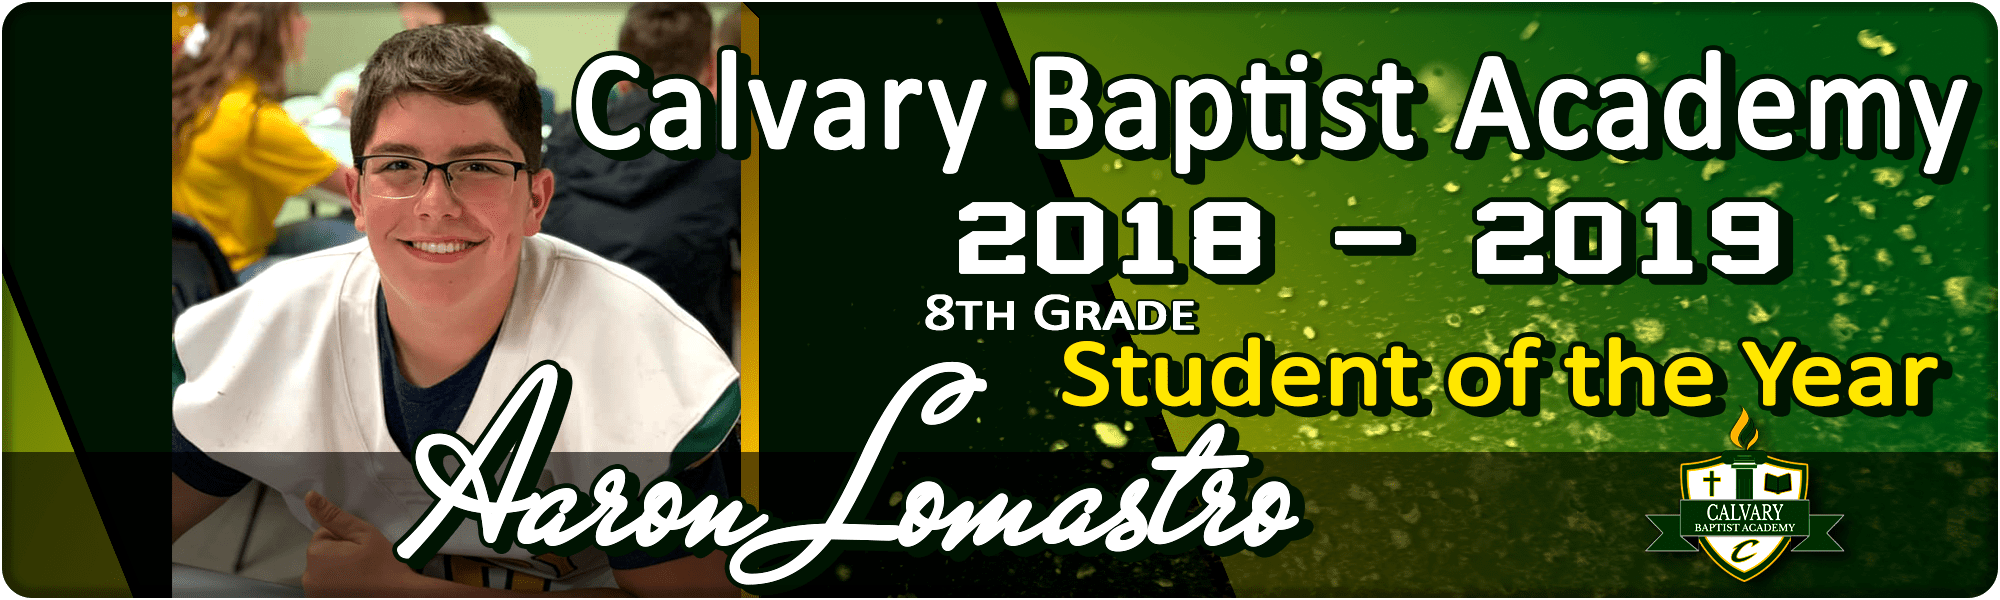 Calvary 8th Grade Student of the Year 2017 - 2018